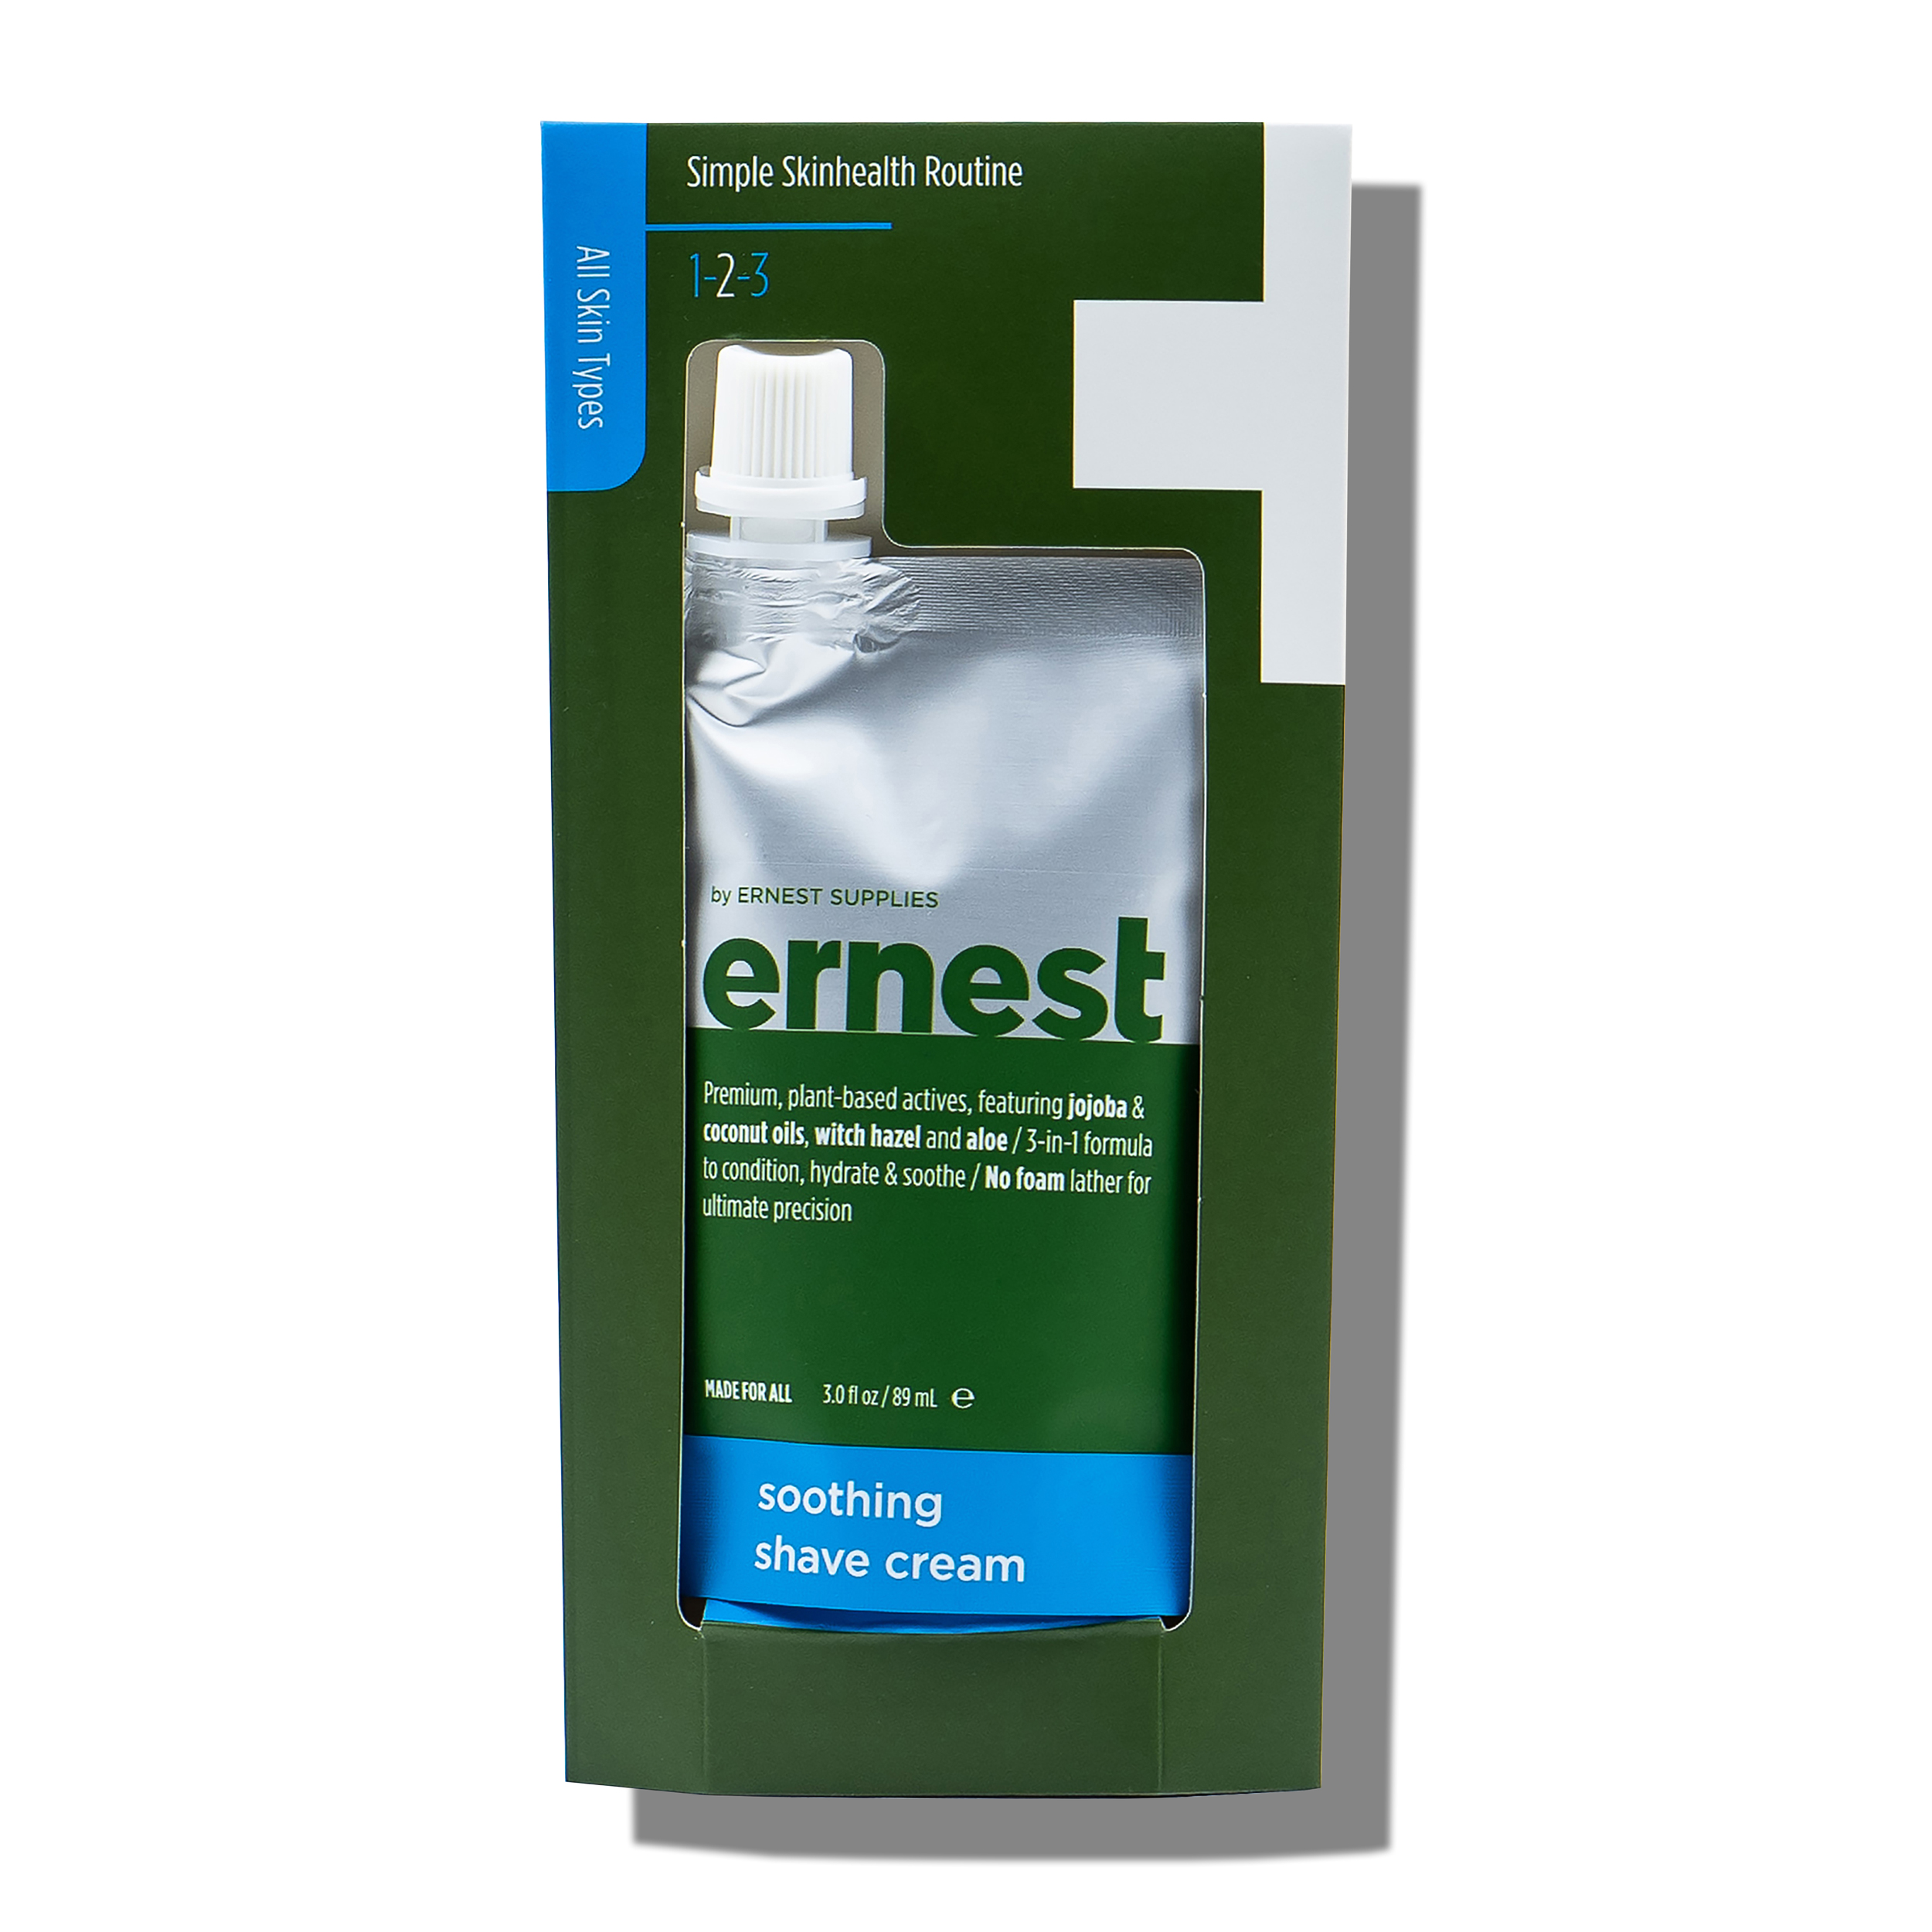 ernest by Ernest Supplies Soothing Shave Cream: 3-in-1 Pre-Shave, Shave Cream, and After Shave, 3 Oz - image 4 of 5